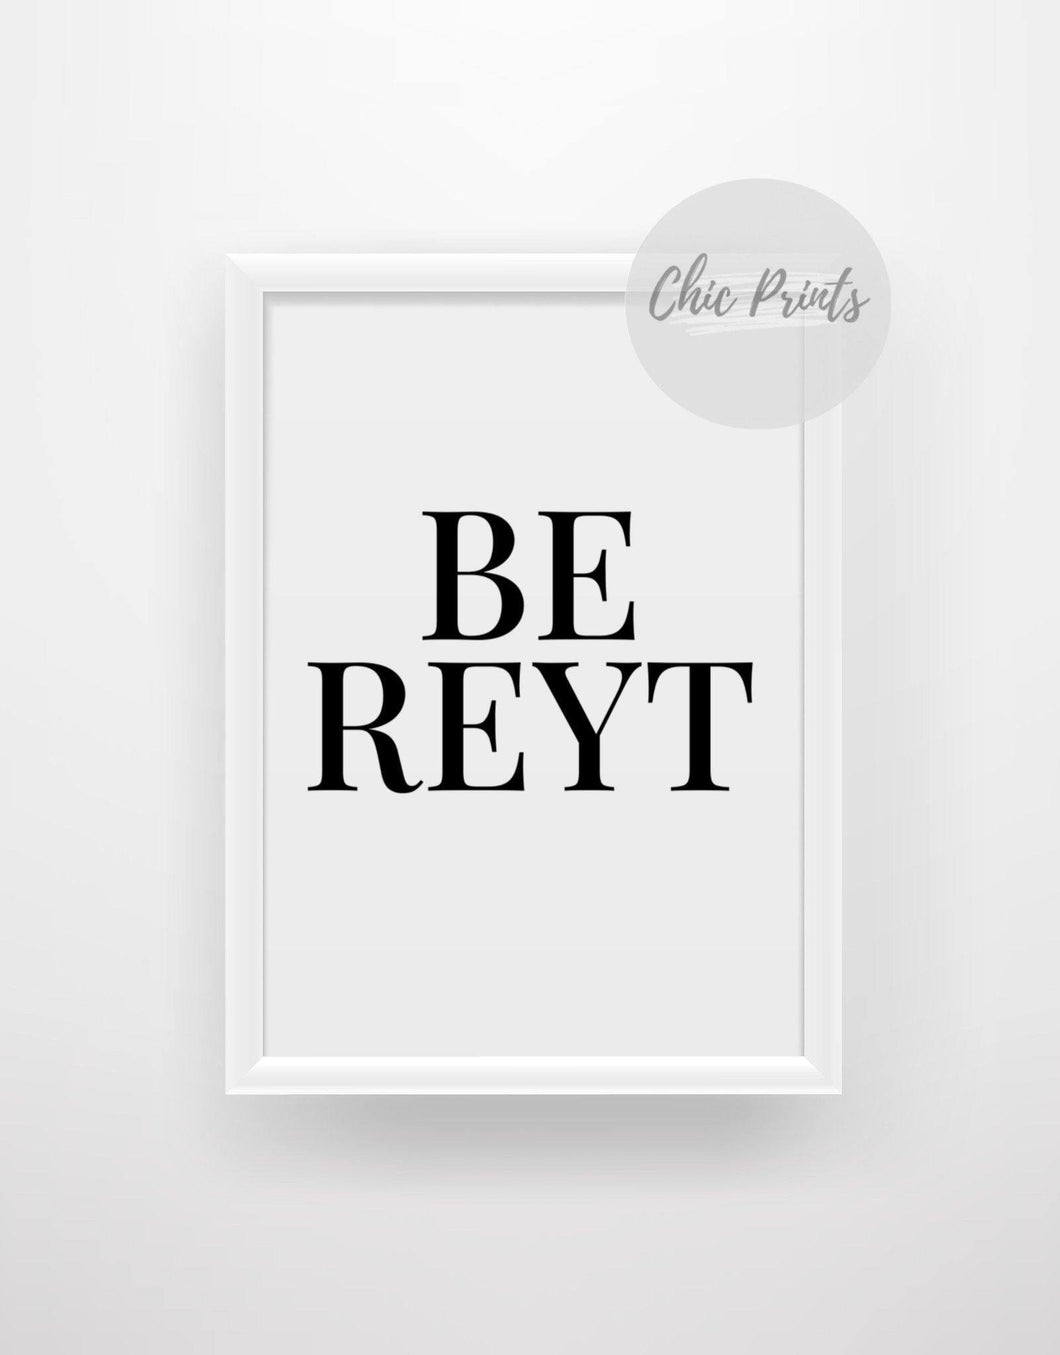 Be Reyt - Yorkshire Quote Print - Chic Prints